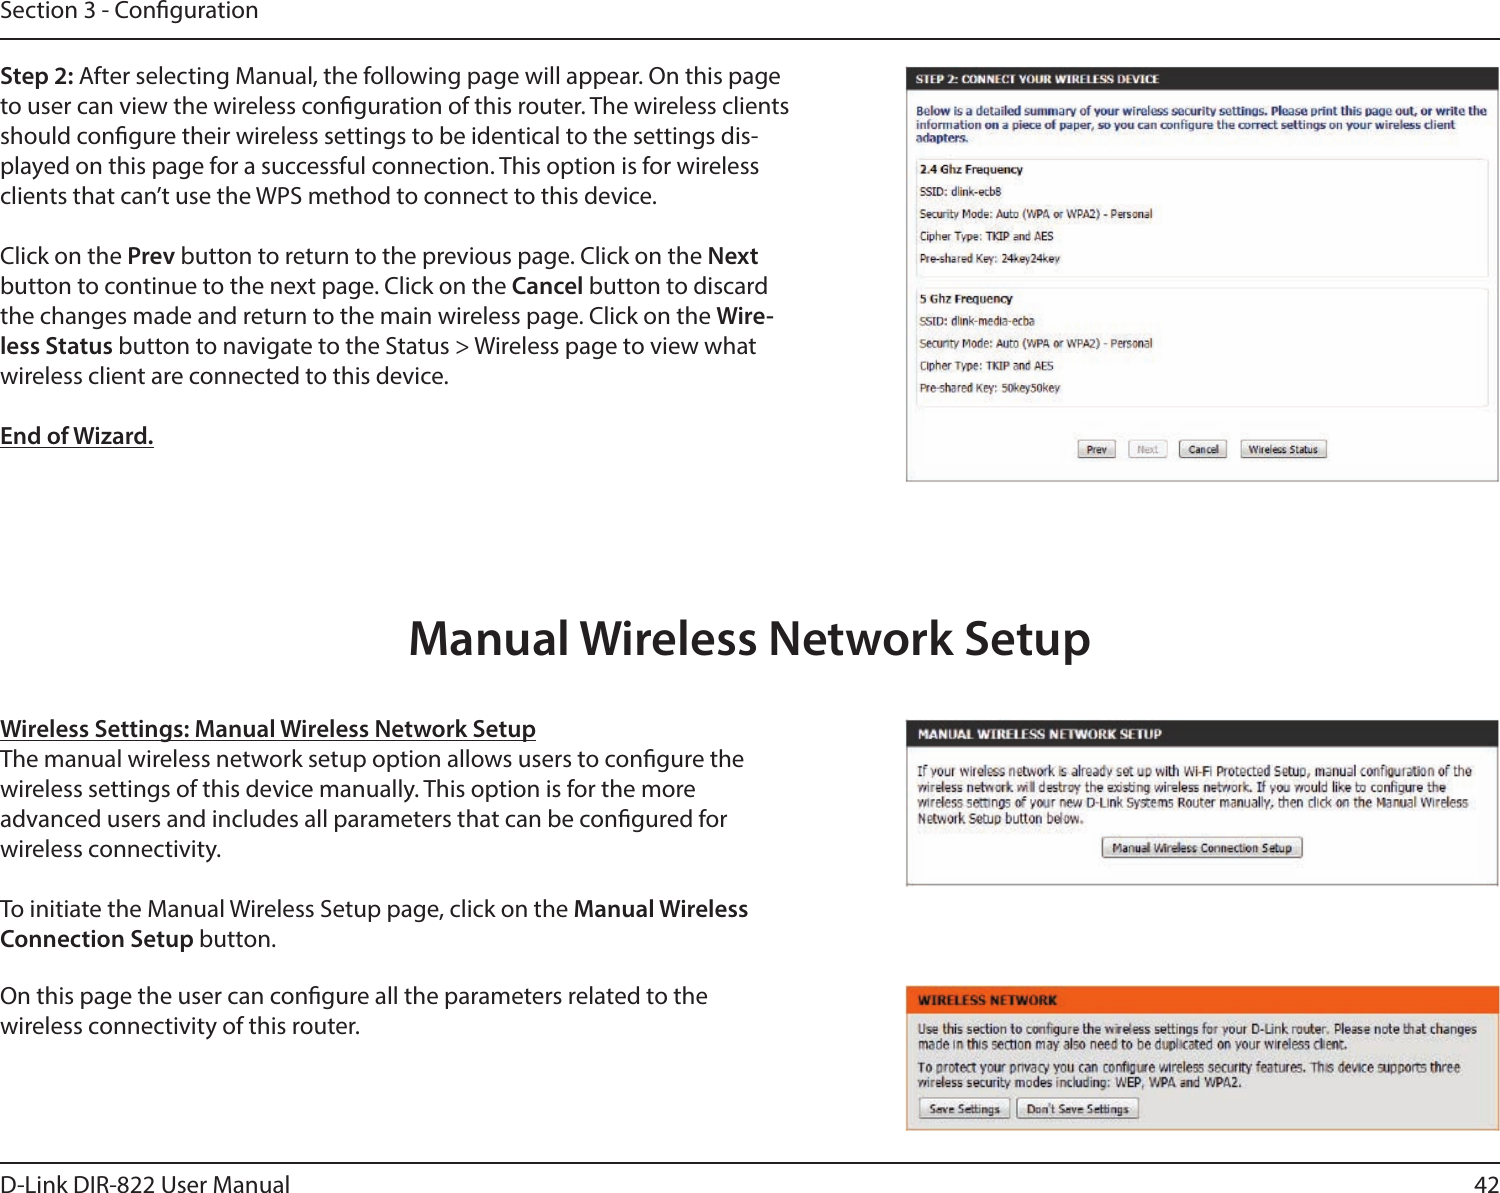 42D-Link DIR-822 User ManualSection 3 - CongurationStep 2: After selecting Manual, the following page will appear. On this page to user can view the wireless conguration of this router. The wireless clients should congure their wireless settings to be identical to the settings dis-played on this page for a successful connection. This option is for wireless clients that can’t use the WPS method to connect to this device.Click on the Prev button to return to the previous page. Click on the Next button to continue to the next page. Click on the Cancel button to discard the changes made and return to the main wireless page. Click on the Wire-less Status button to navigate to the Status &gt; Wireless page to view what wireless client are connected to this device.End of Wizard.Wireless Settings: Manual Wireless Network SetupThe manual wireless network setup option allows users to congure the wireless settings of this device manually. This option is for the more  advanced users and includes all parameters that can be congured for  wireless connectivity.To initiate the Manual Wireless Setup page, click on the Manual Wireless Connection Setup button.On this page the user can congure all the parameters related to the  wireless connectivity of this router.Manual Wireless Network Setup